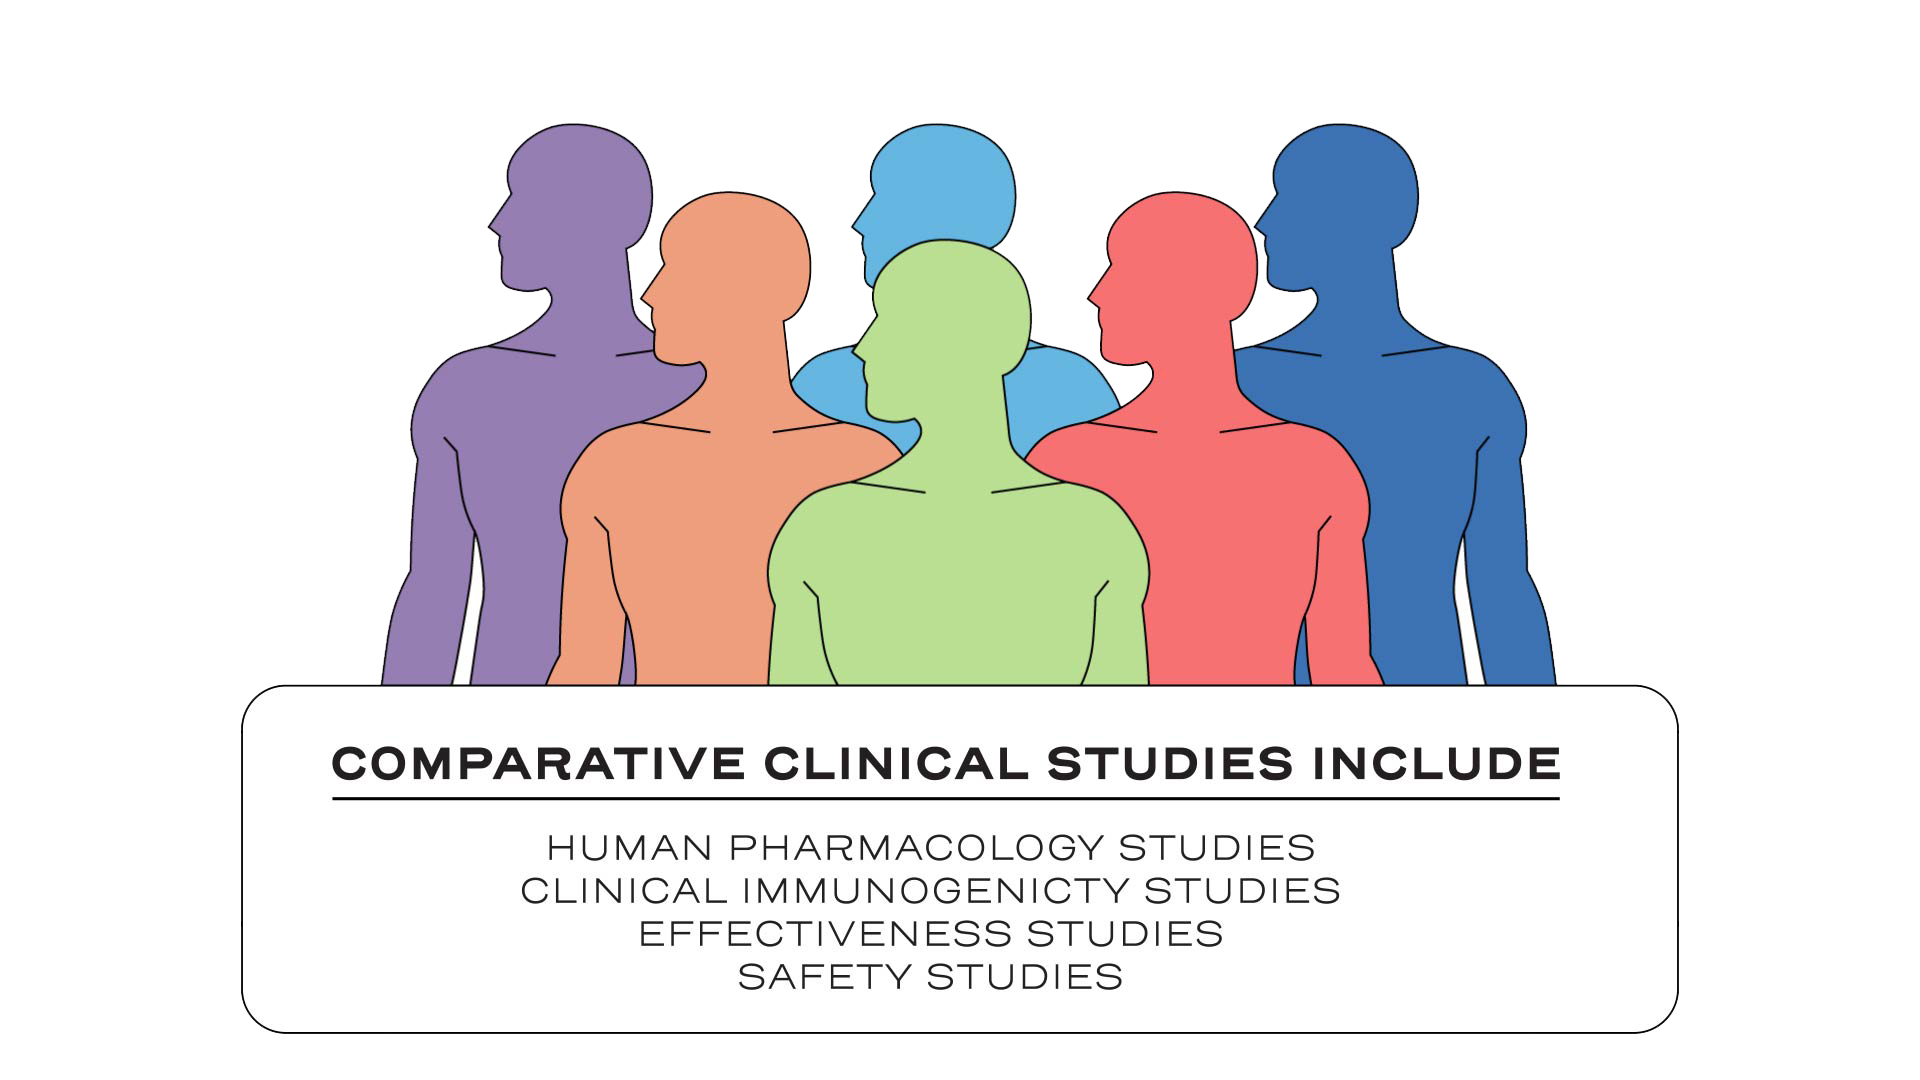 Comparative clinical studies